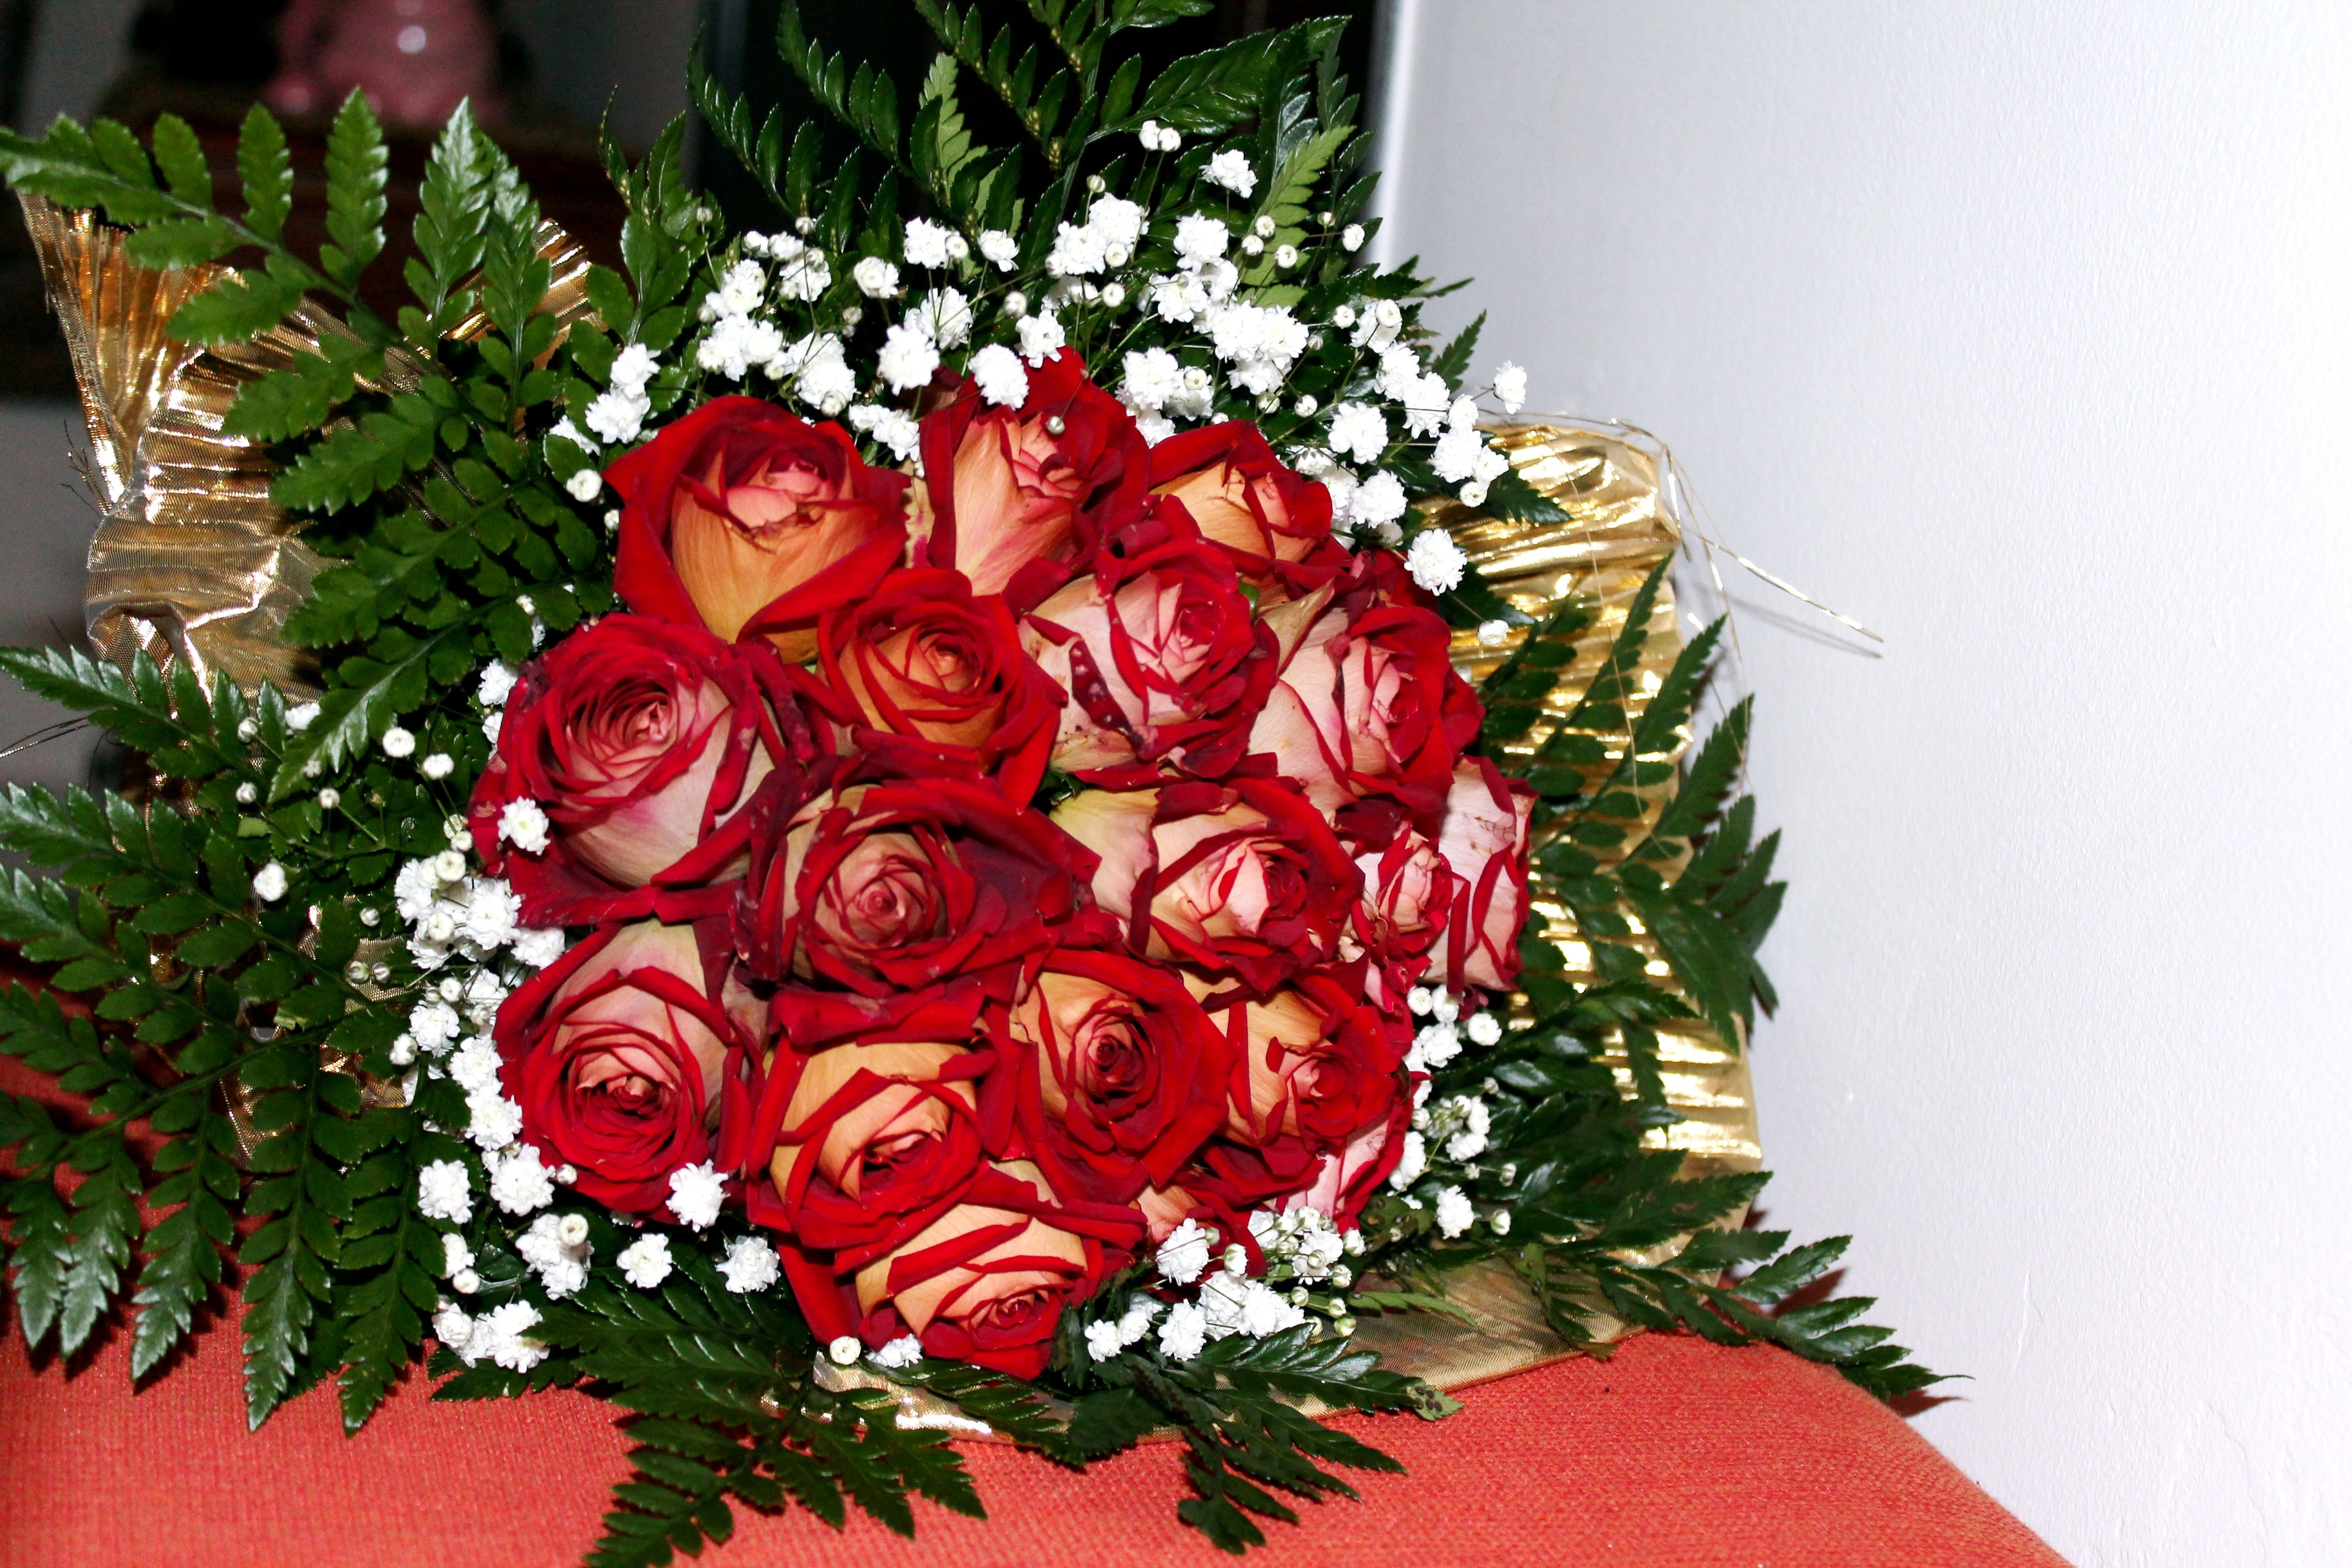 red and white roses surrounds with green fern plants of red textile